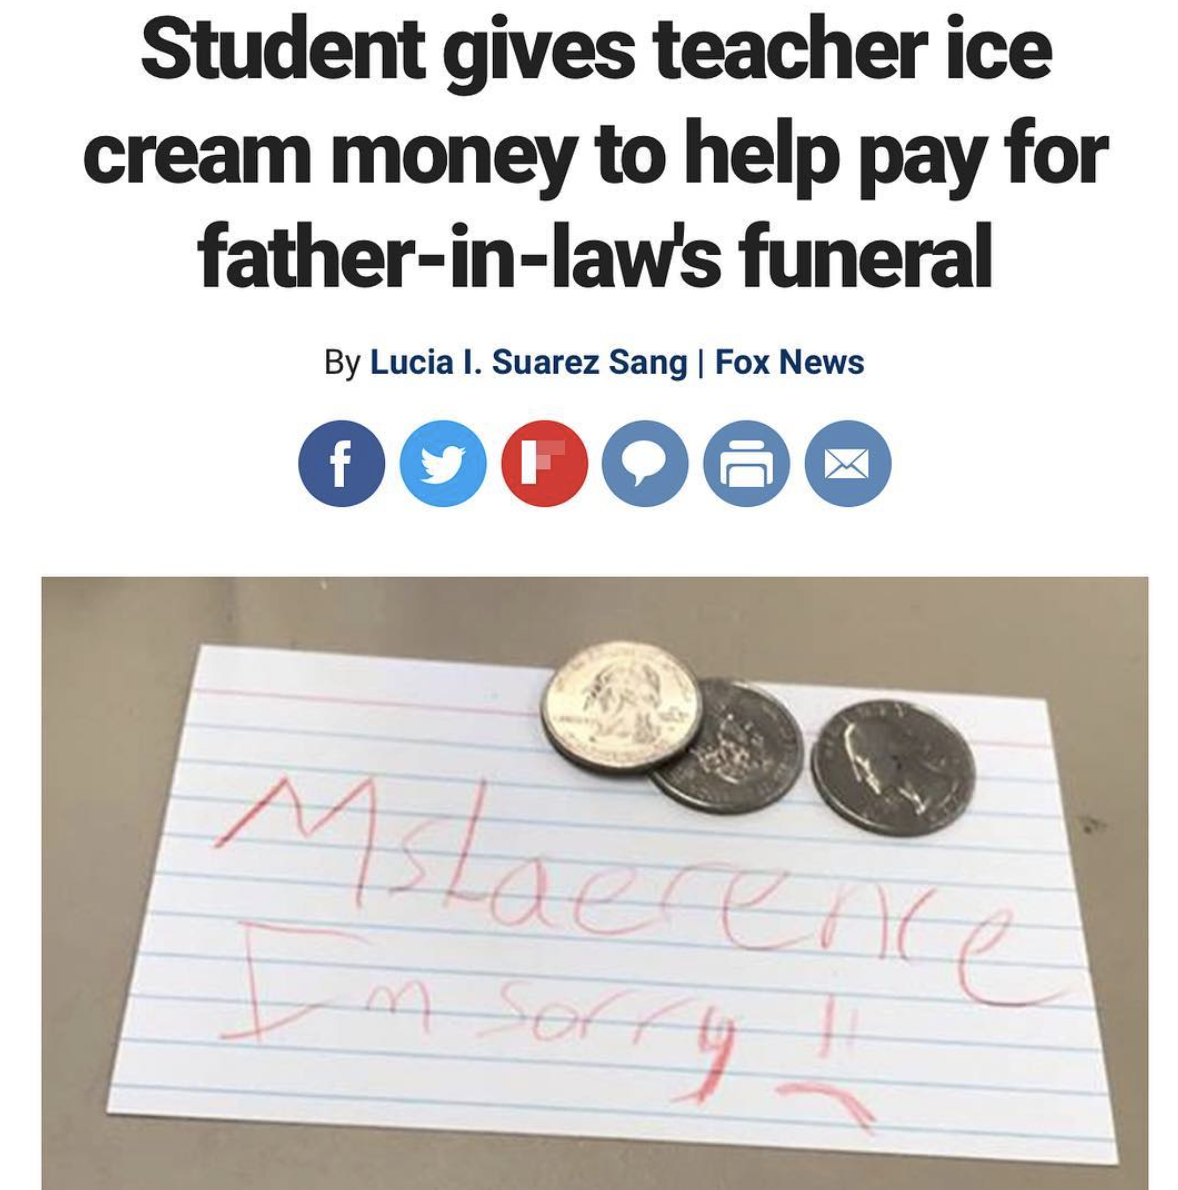 paper - Student gives teacher ice cream money to help pay for fatherinlaw's funeral By Lucia I. Suarez Sang Fox News 000000